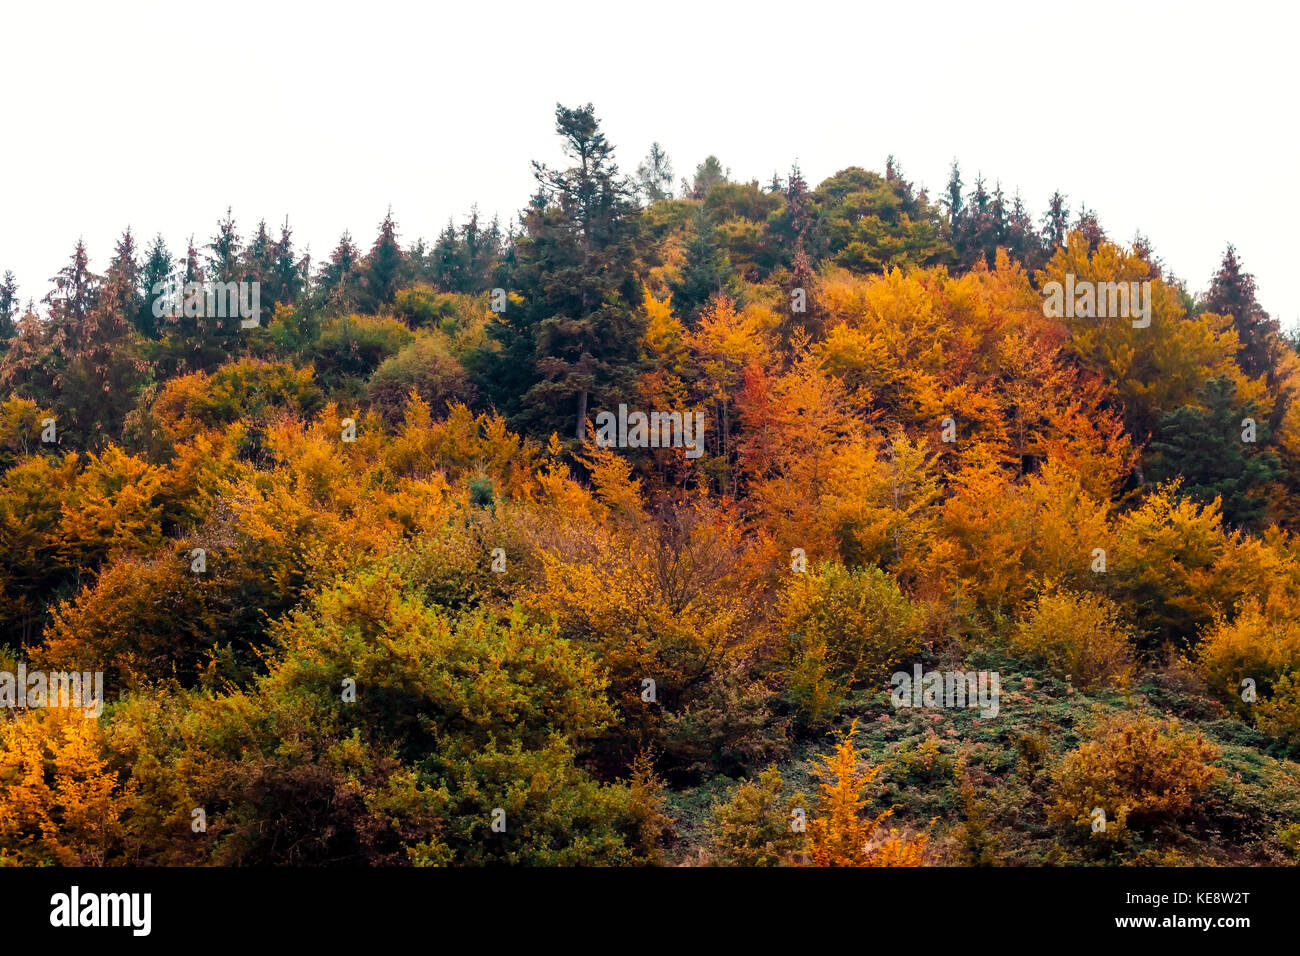 The Kobernausser Wald is the largest woodland area in Central Europe. Stock Photo